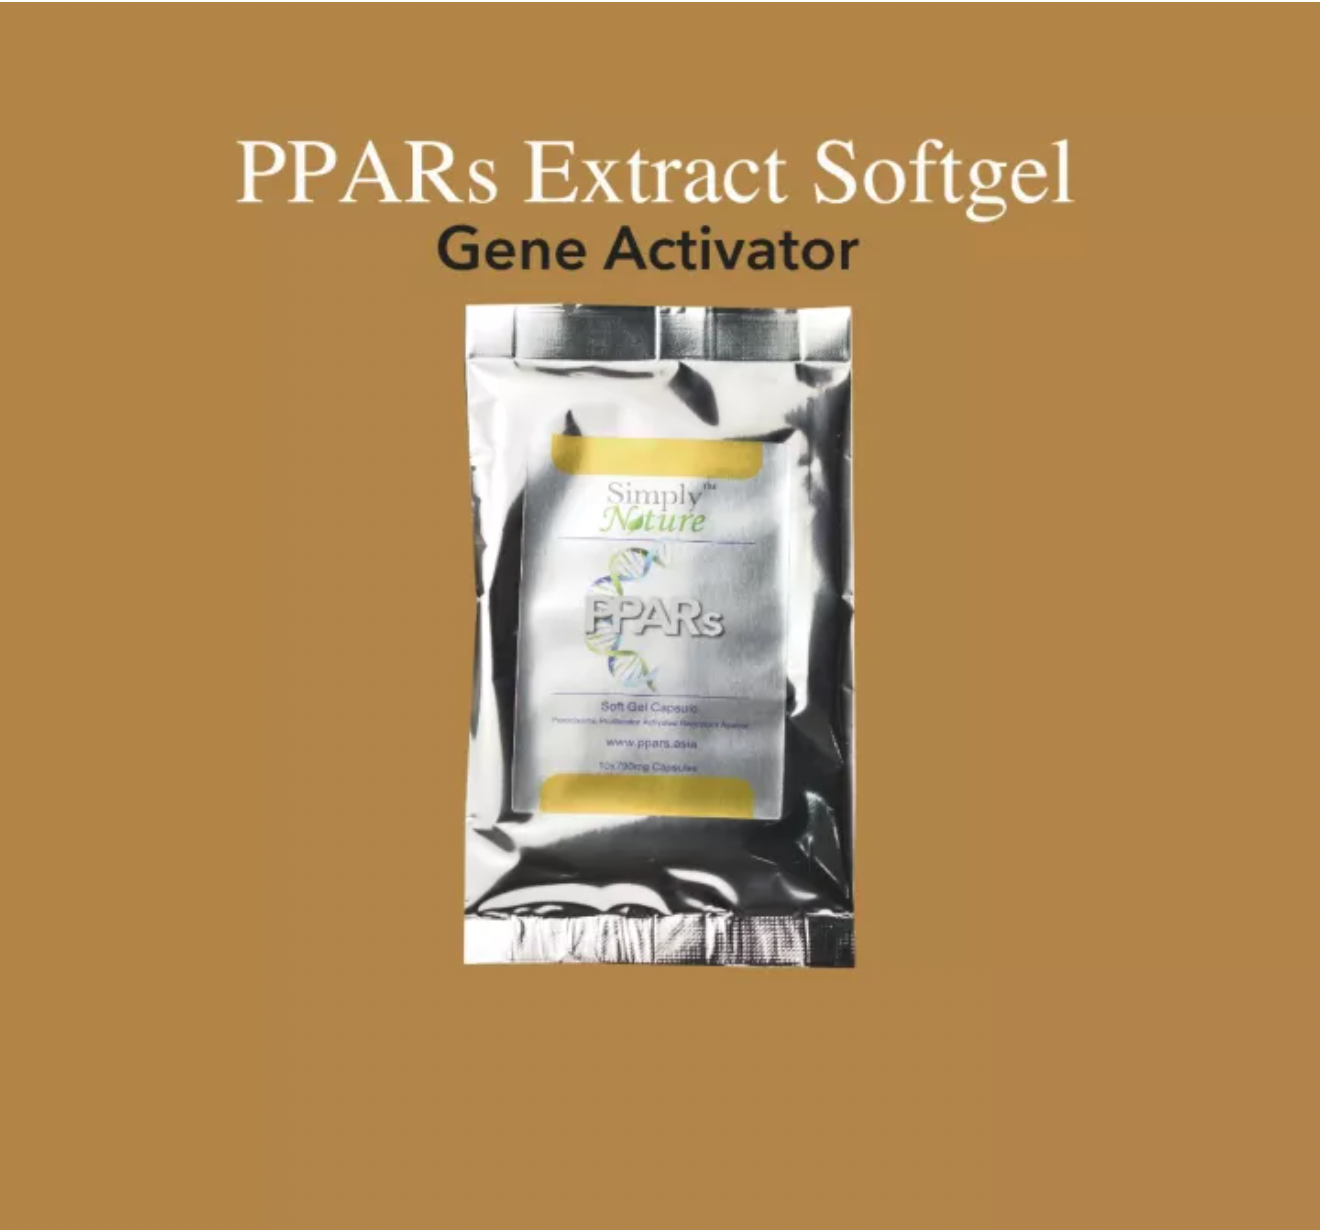 PPARs Extract Softgel